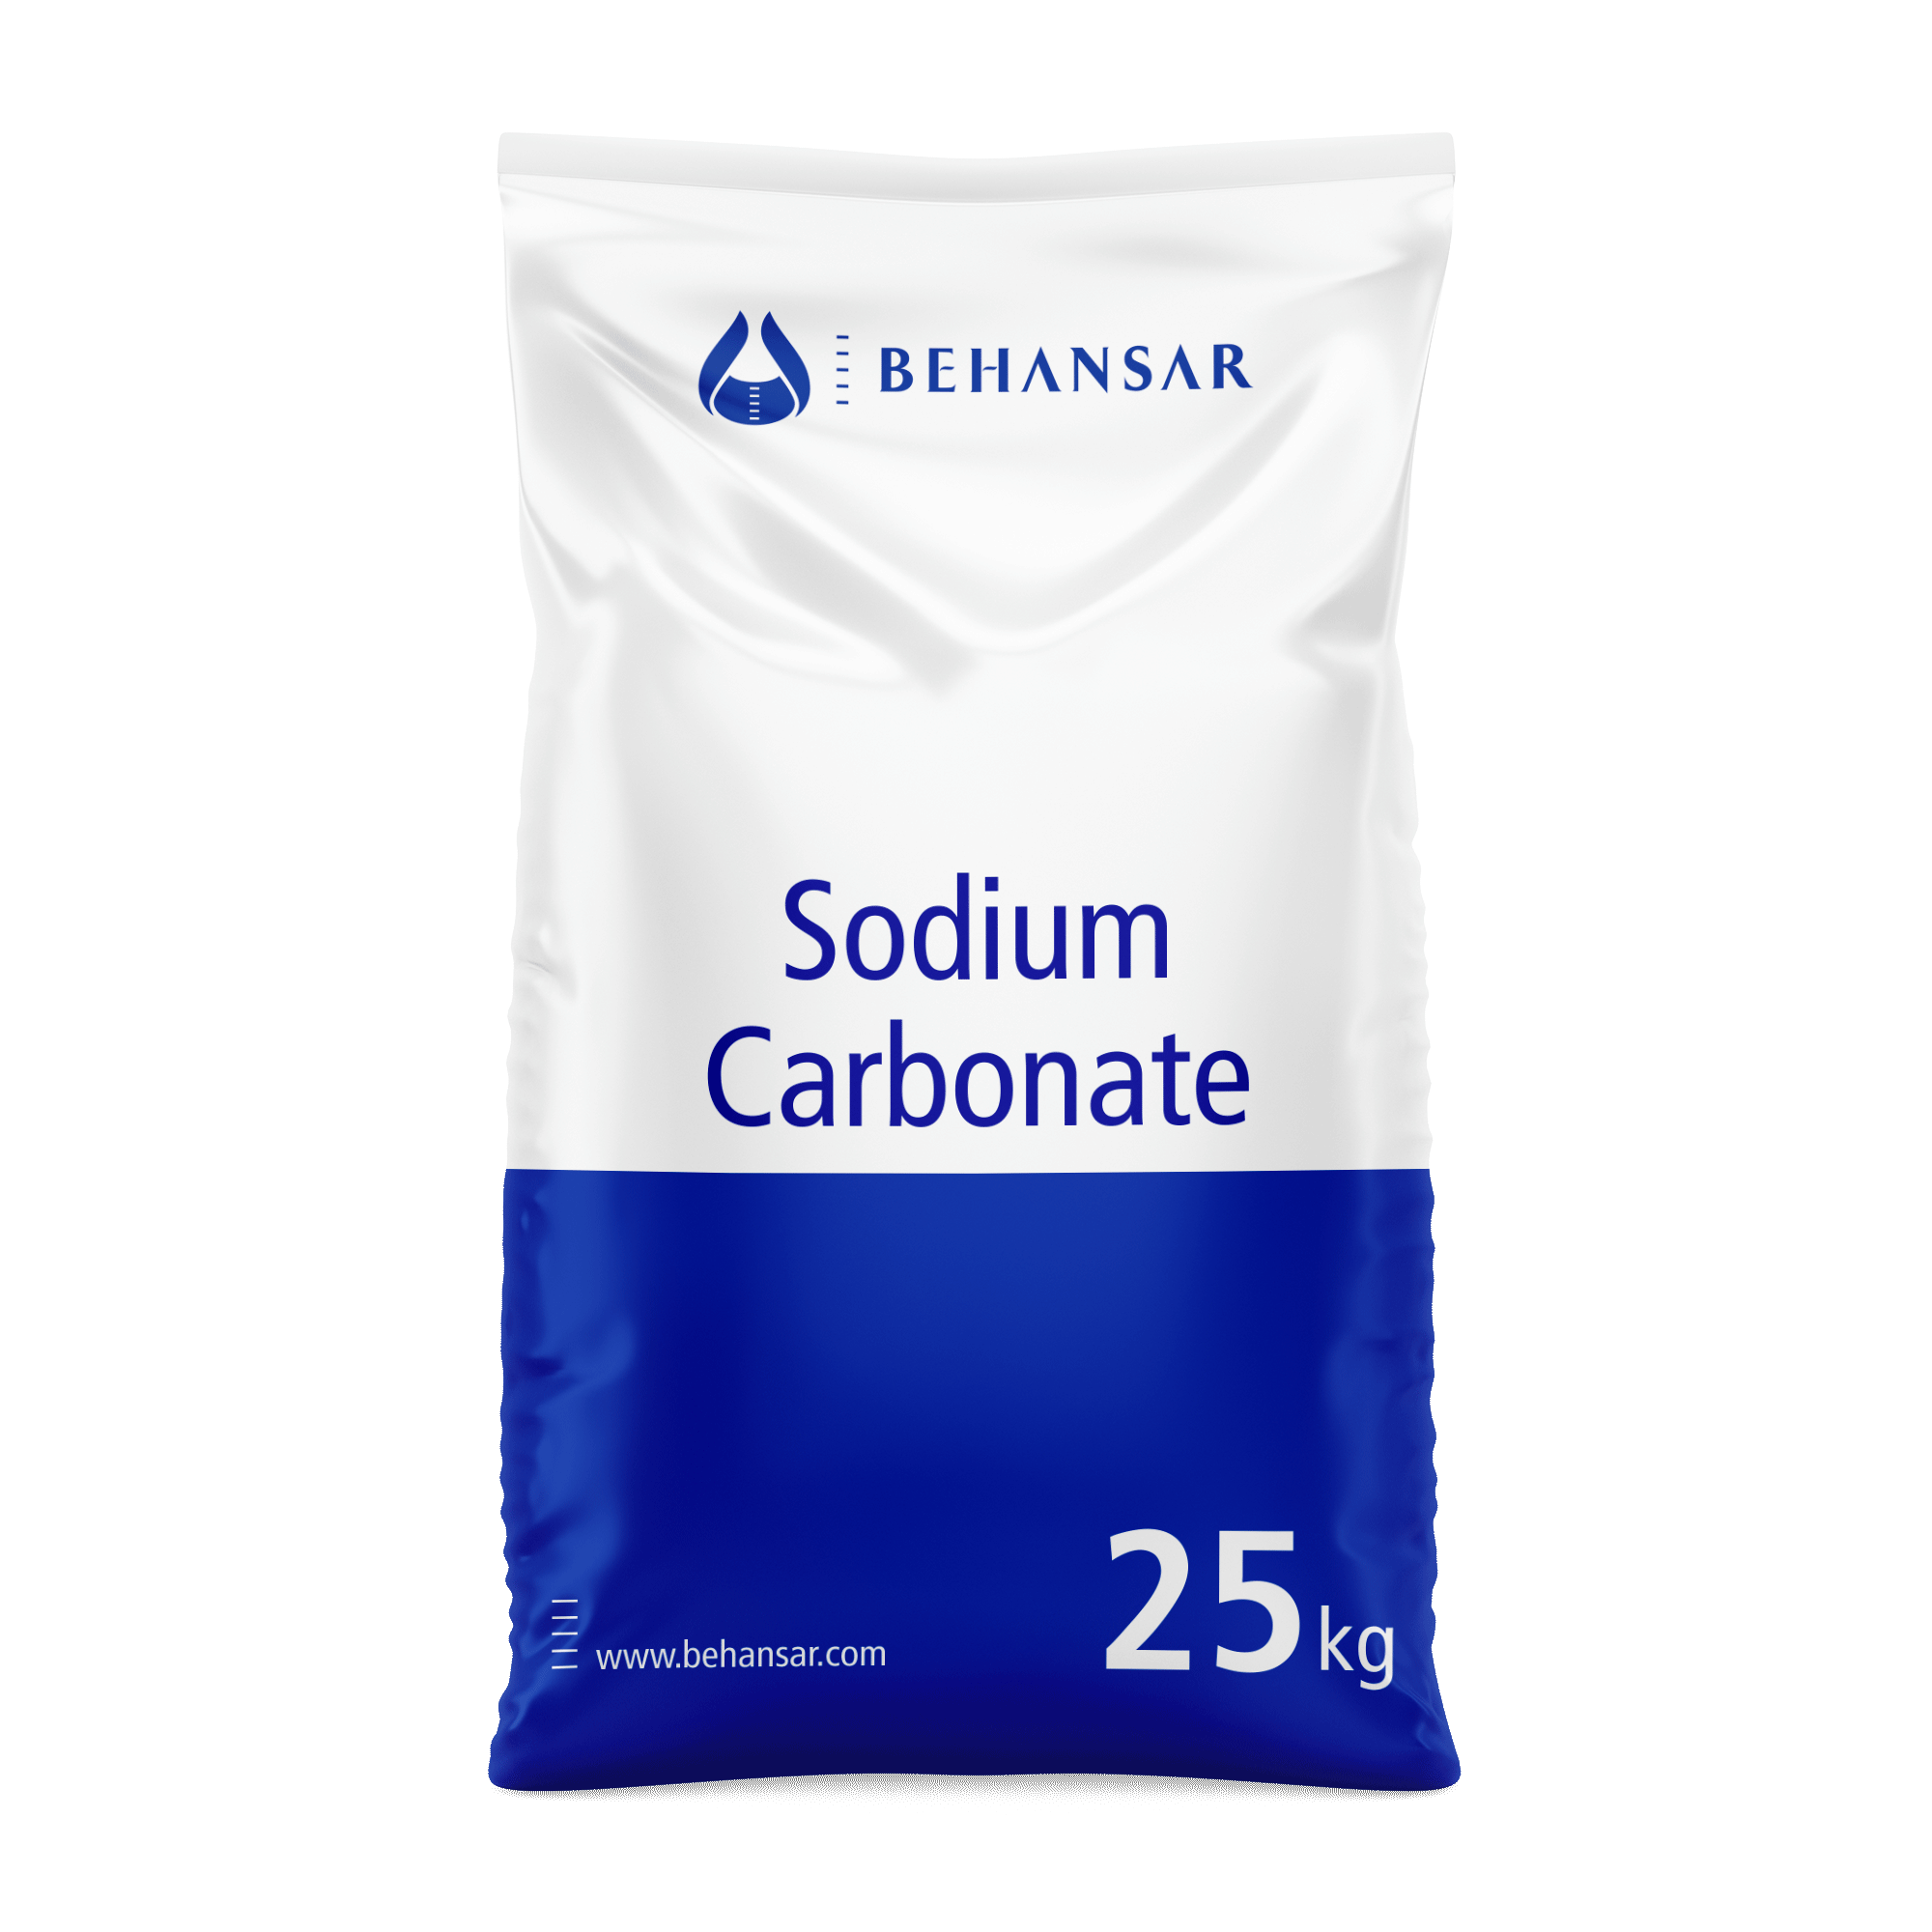 Sodium Carbonate is one of the products of Behansar Co